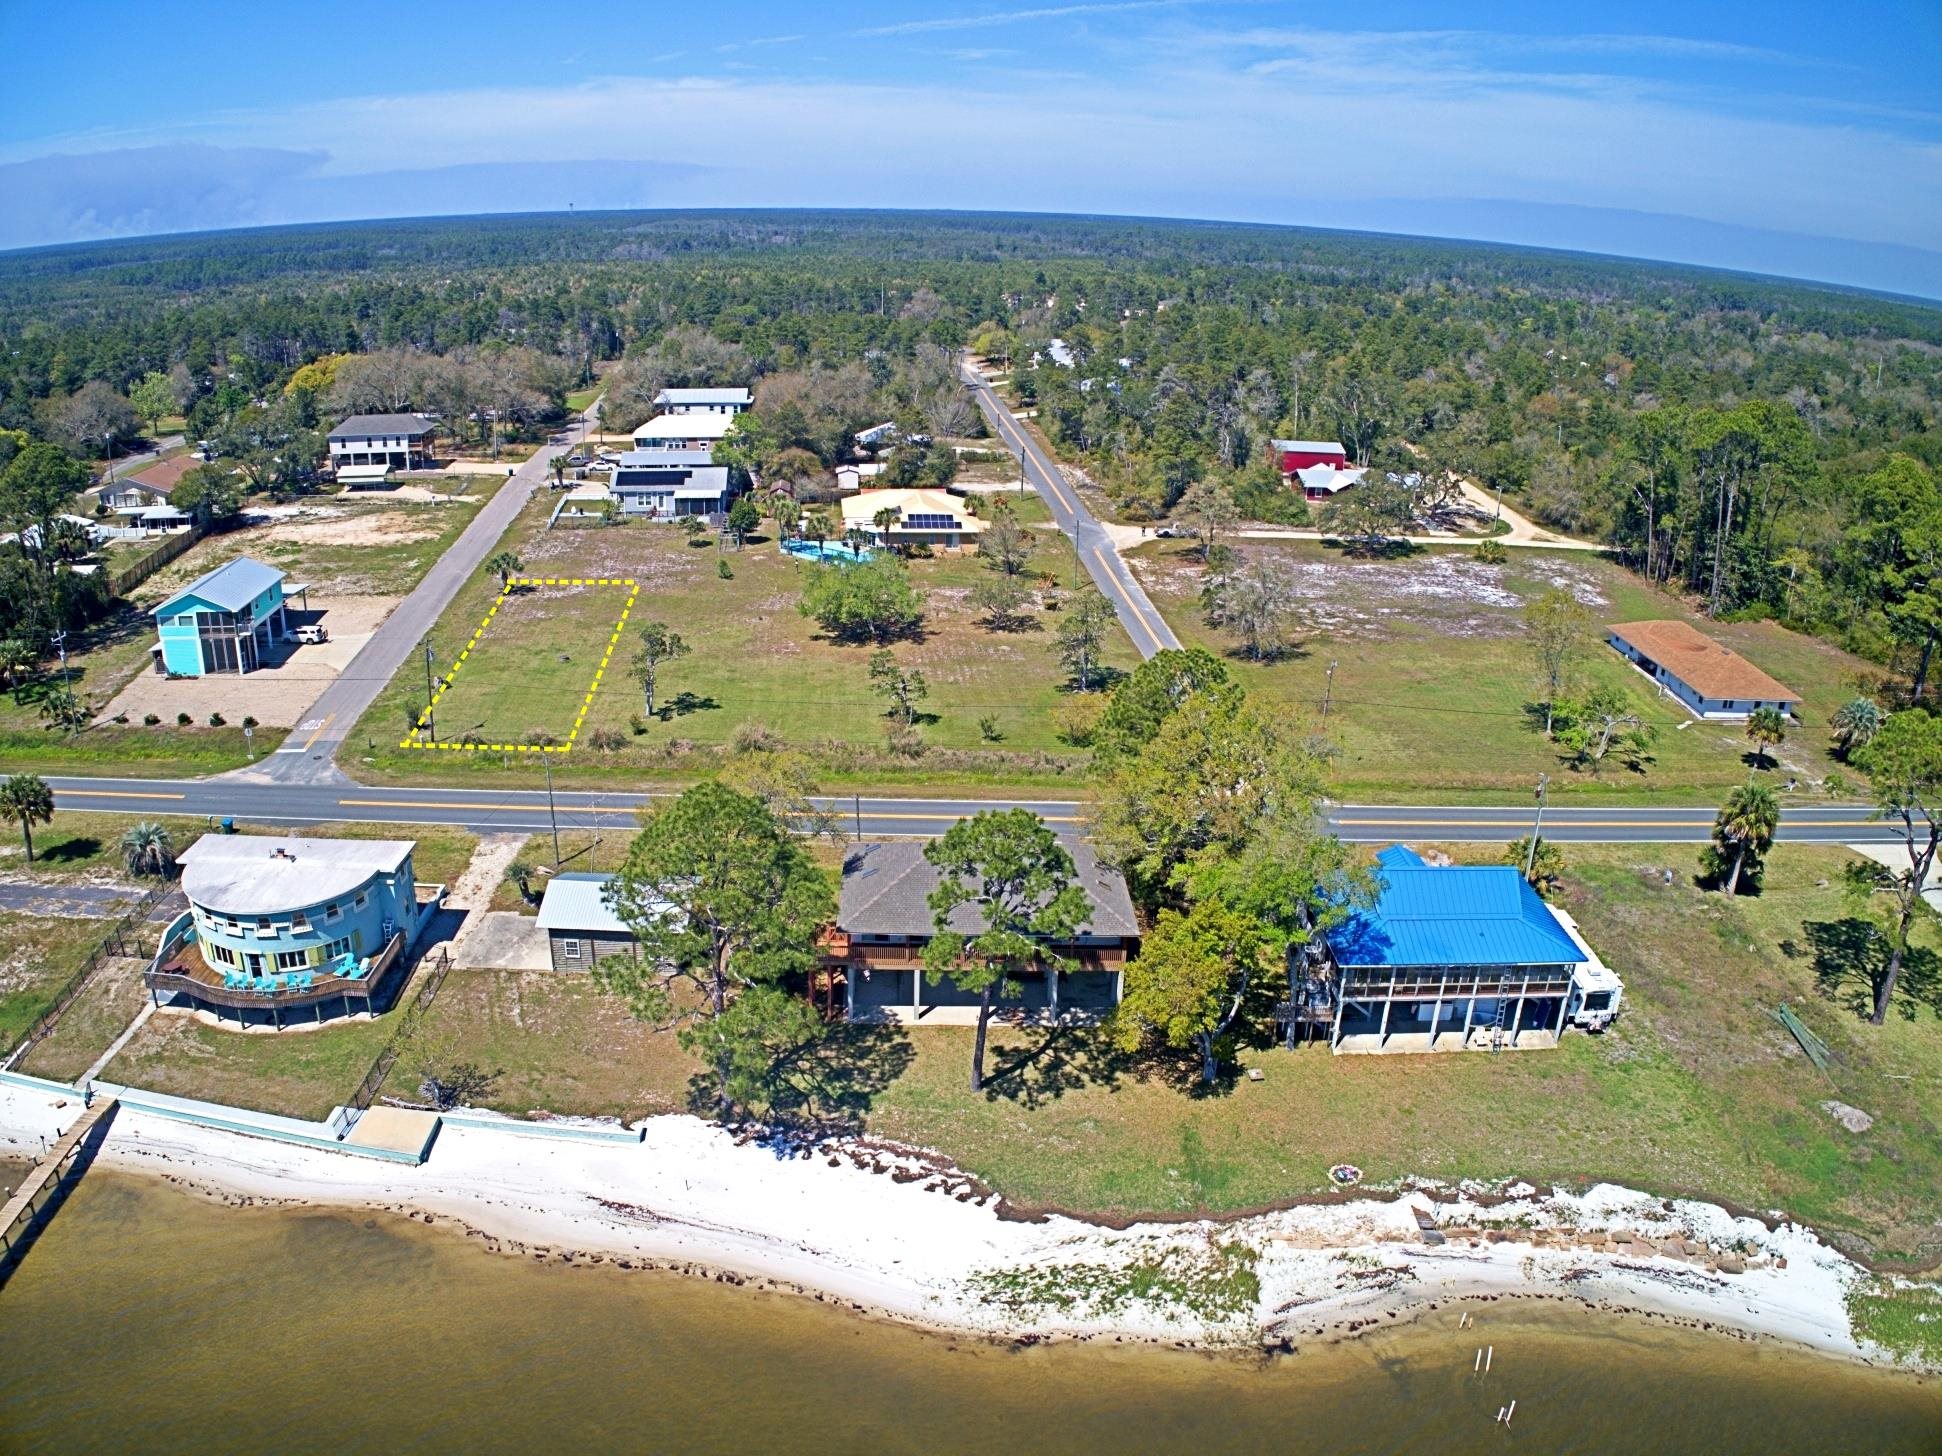 2285 Hwy 98 E,CARRABELLE,Florida 32322,Lots and land,Hwy 98 E,368588